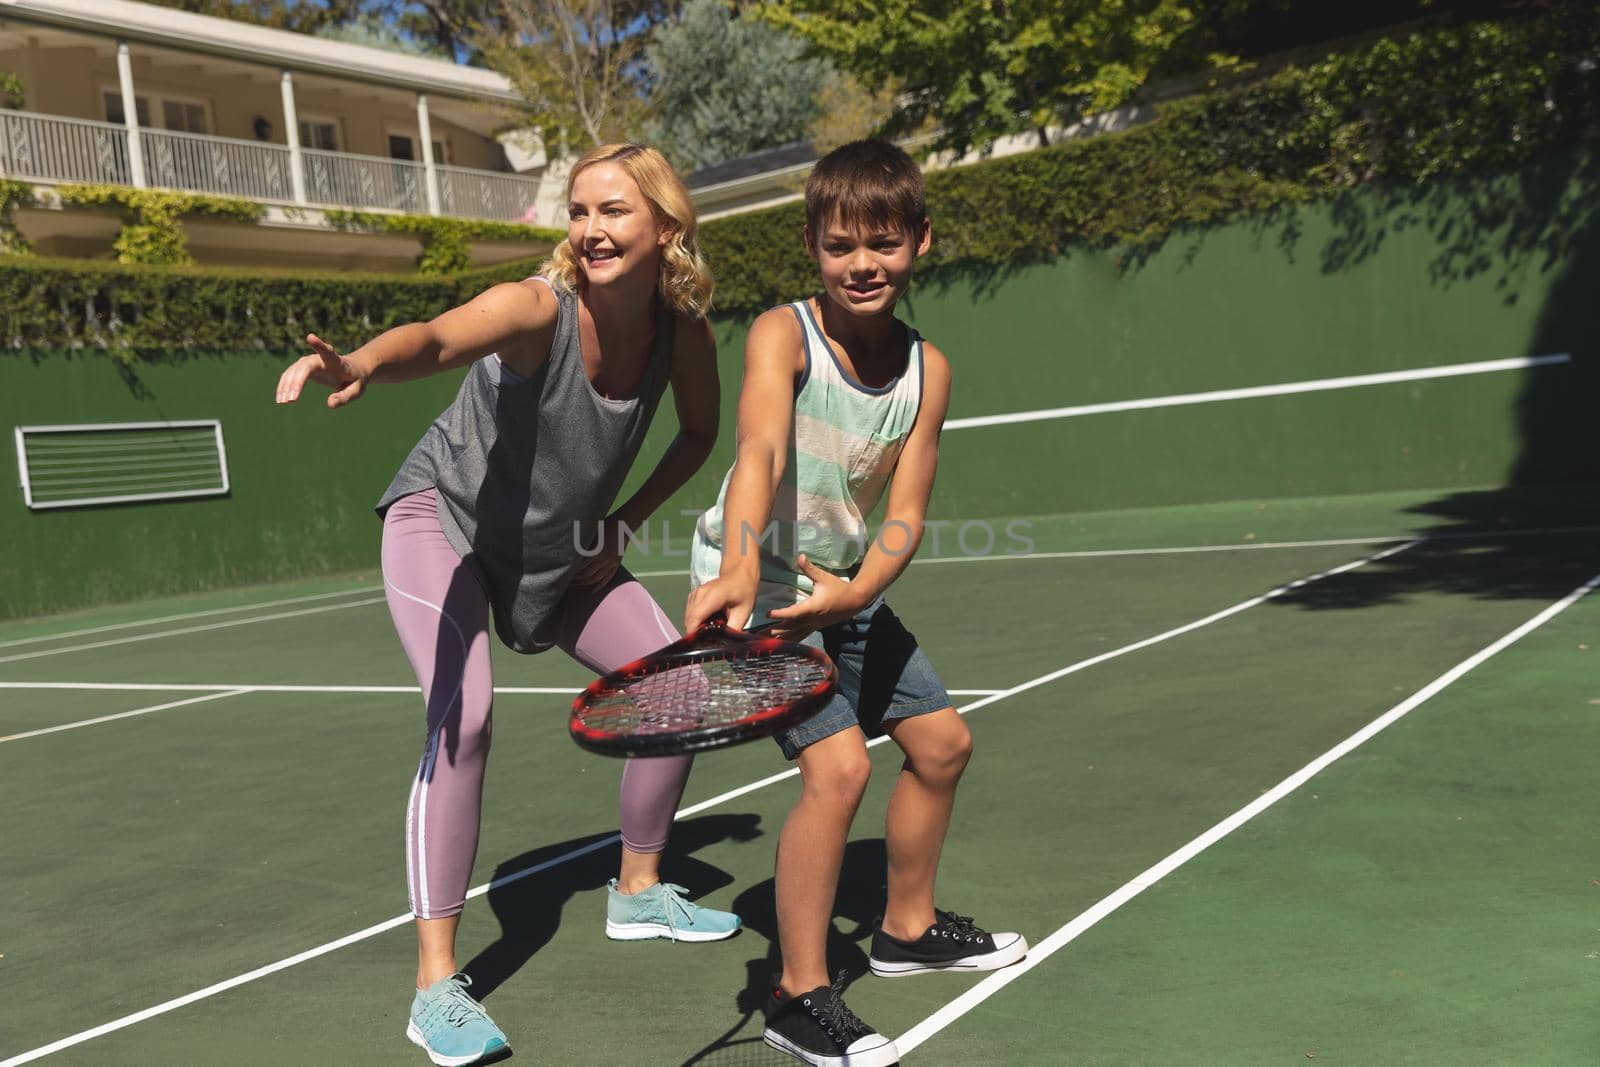 Caucasian mother and son outdoors, playing tennis on tennis court. family enjoying healthy free time activities together.